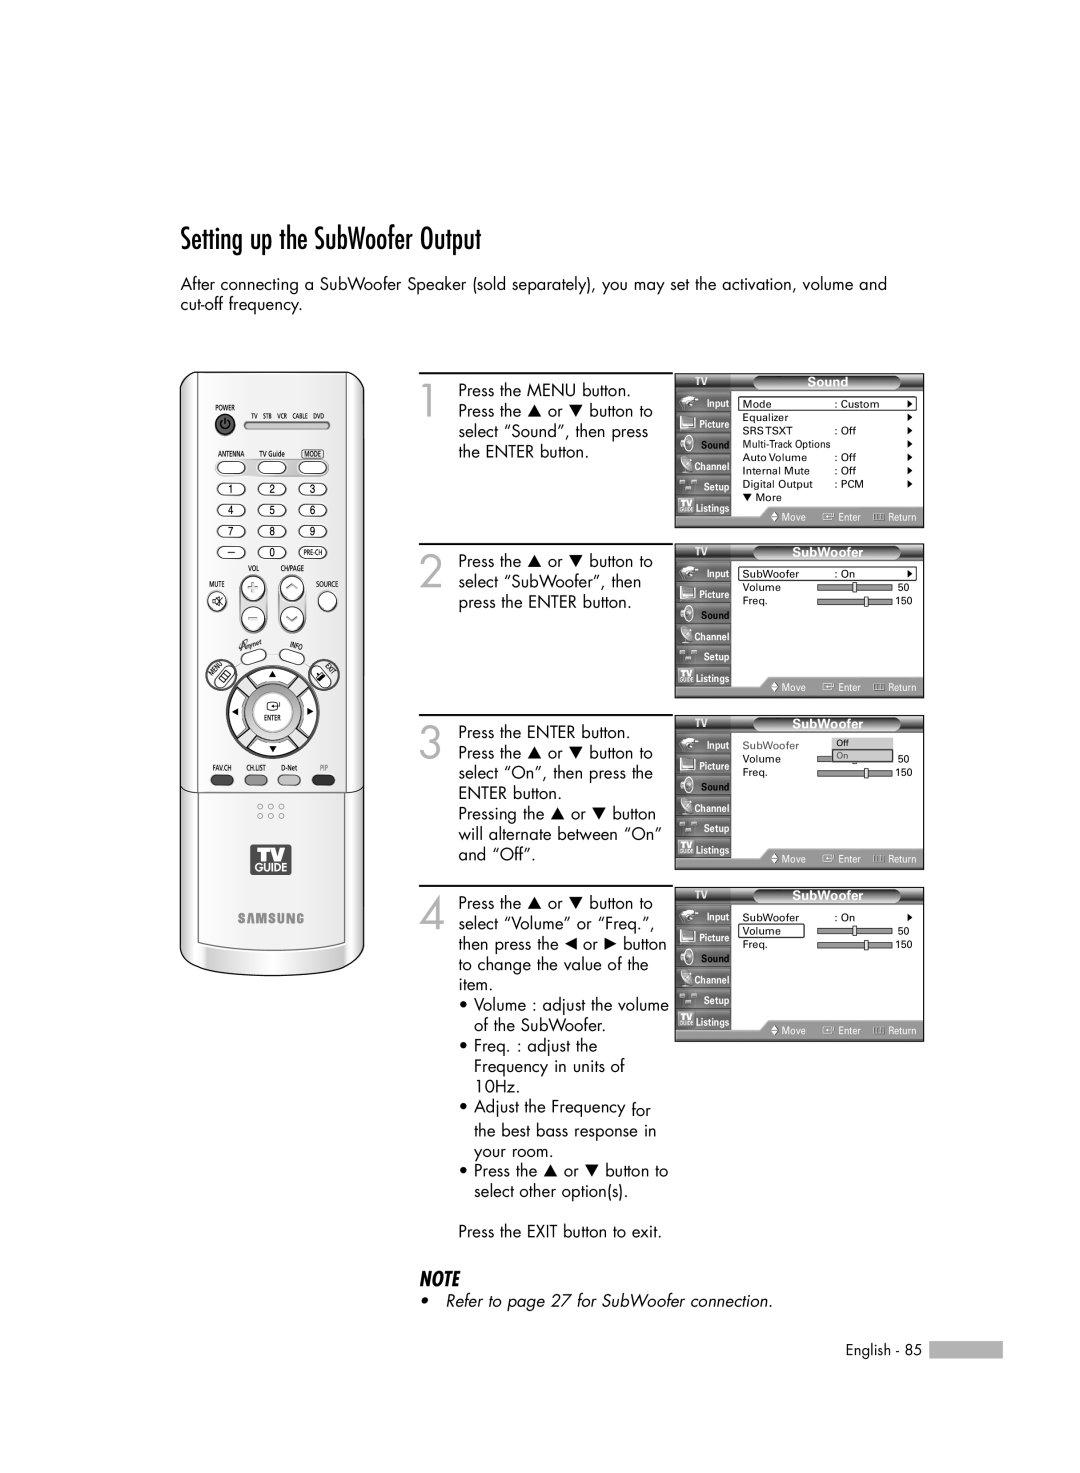 Samsung HL-R5688W manual Setting up the SubWoofer Output, Refer to page 27 for SubWoofer connection 